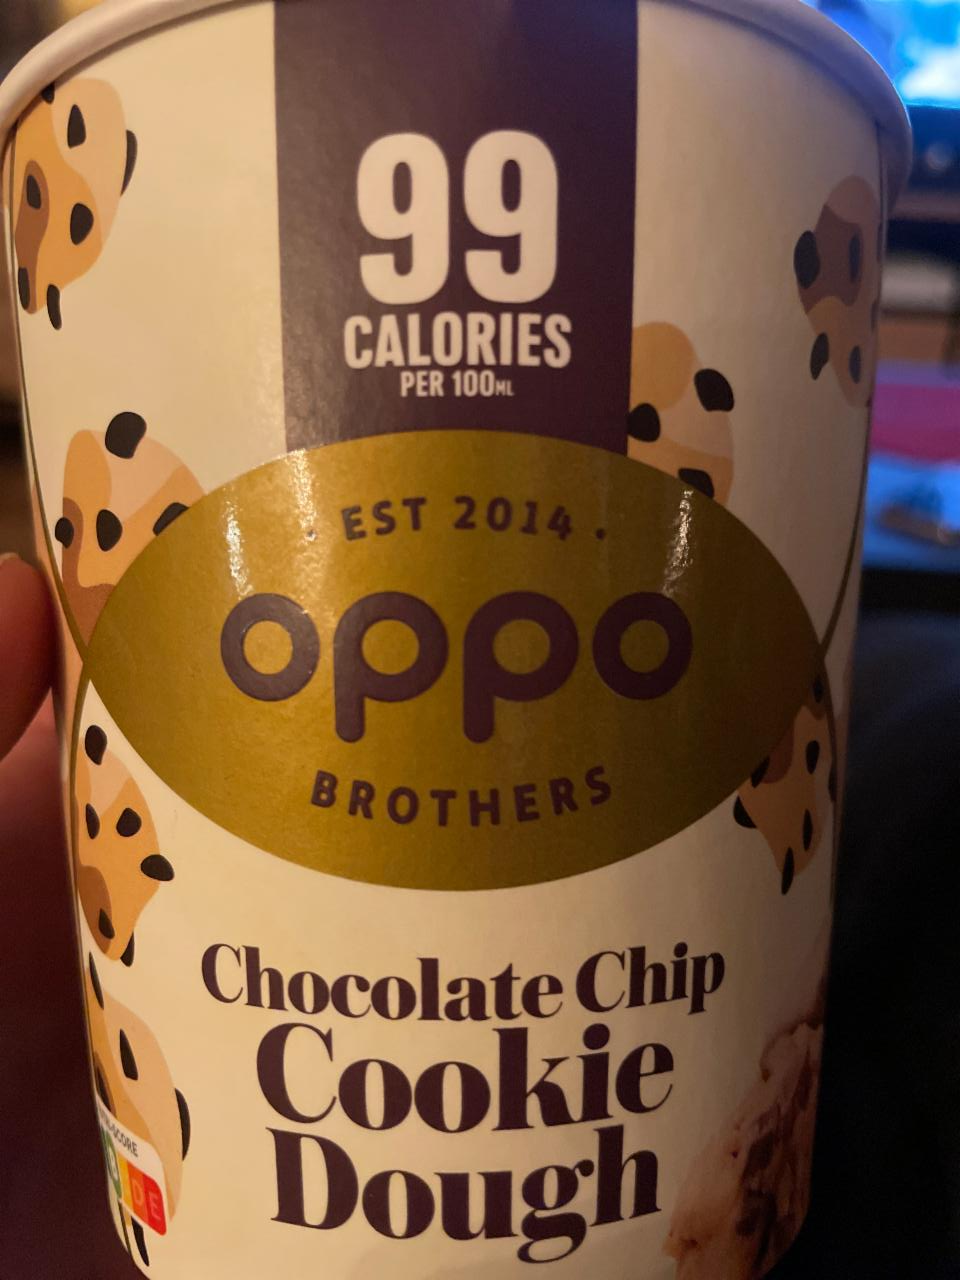 Fotografie - Chocolate Chip Cookie Dough Oppo